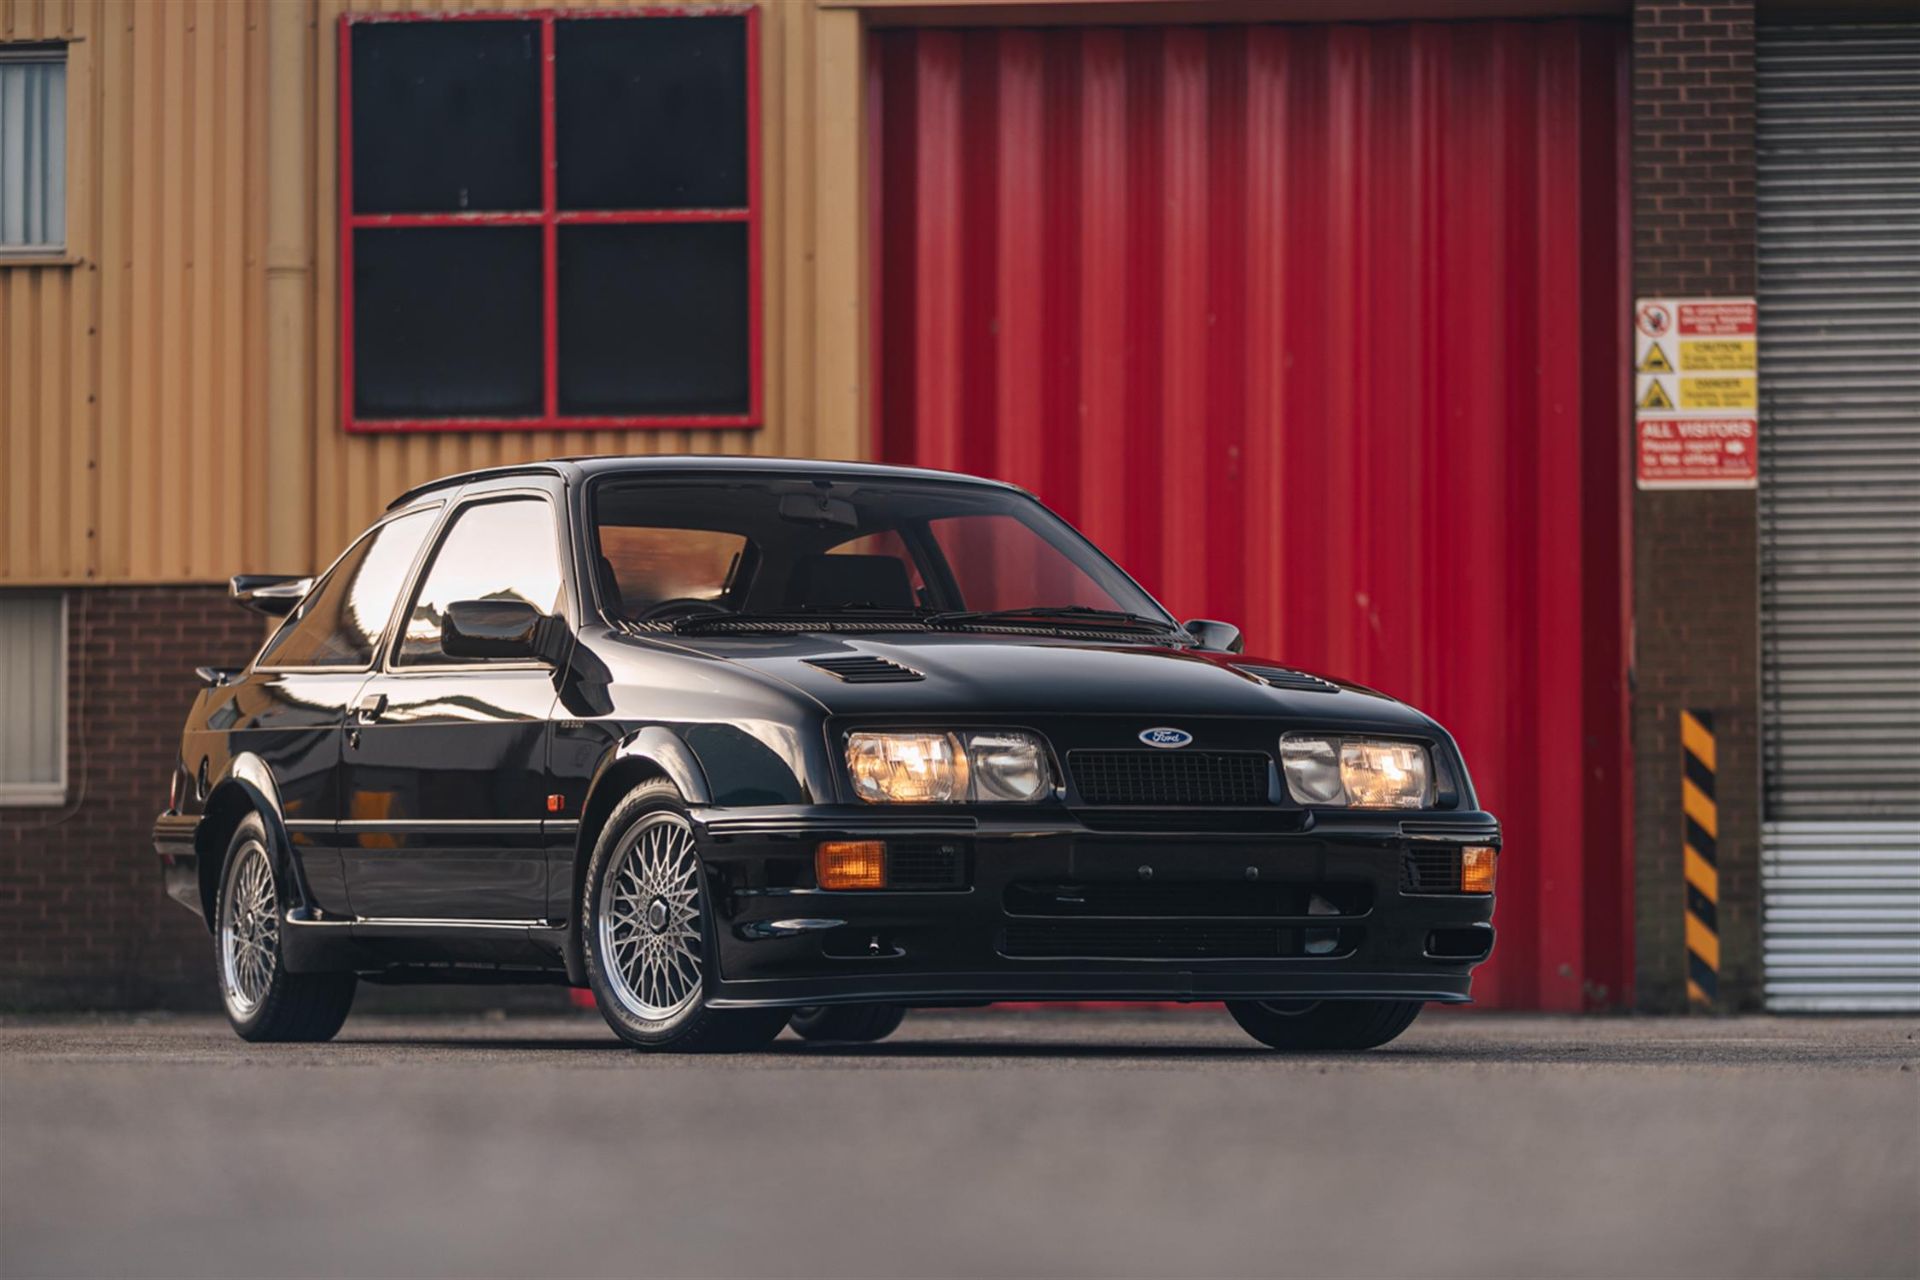 1987 Ford Sierra Cosworth RS500 - Image 10 of 10